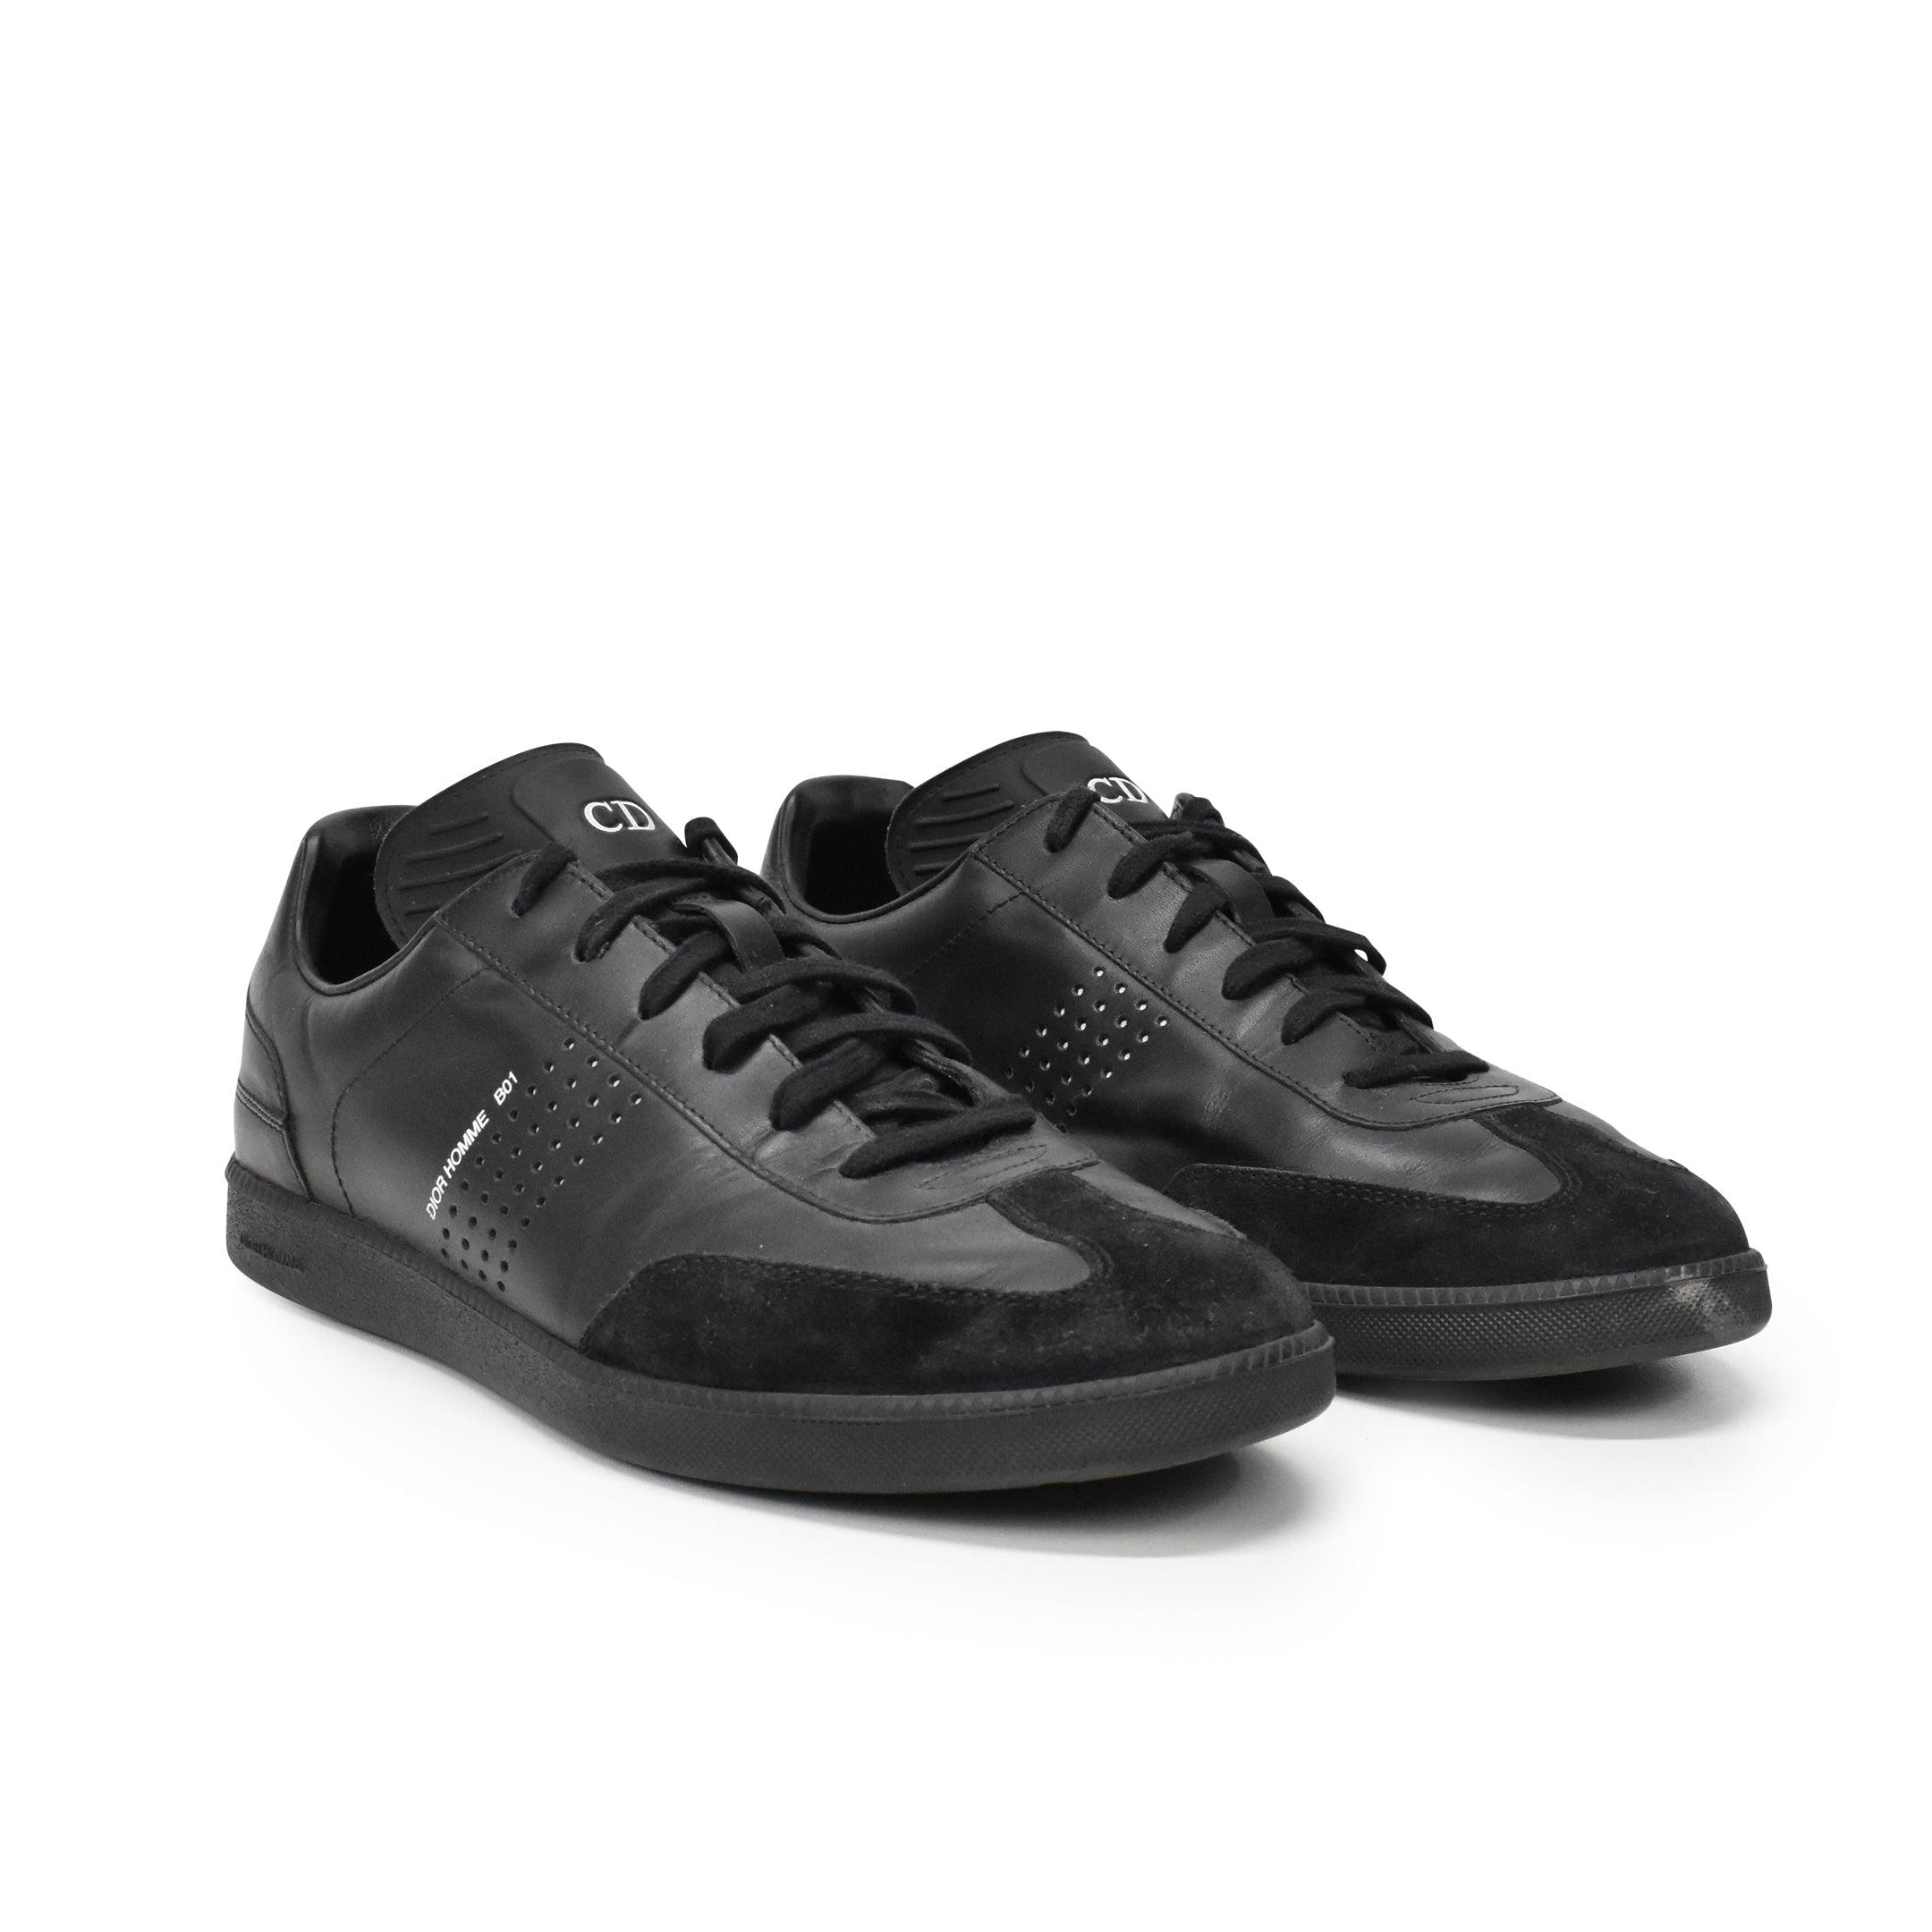 Christian Dior 'Homme B01' Low-Top Sneakers - EU 39 - Fashionably Yours